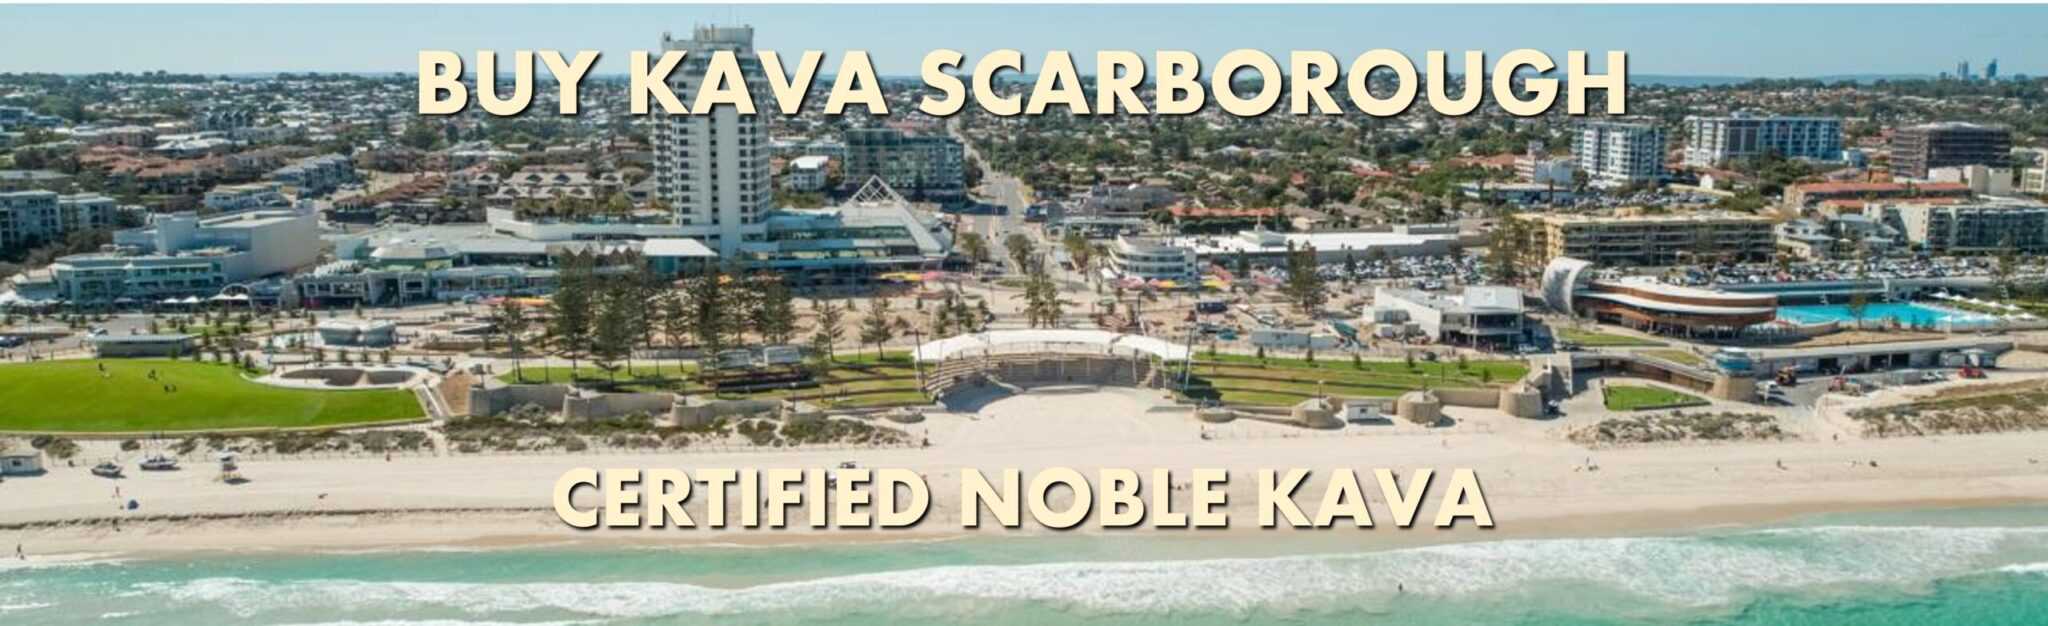 Scarborough Beach in Western Australia with caption Buy Kava Scarborough Certified Noble Kava